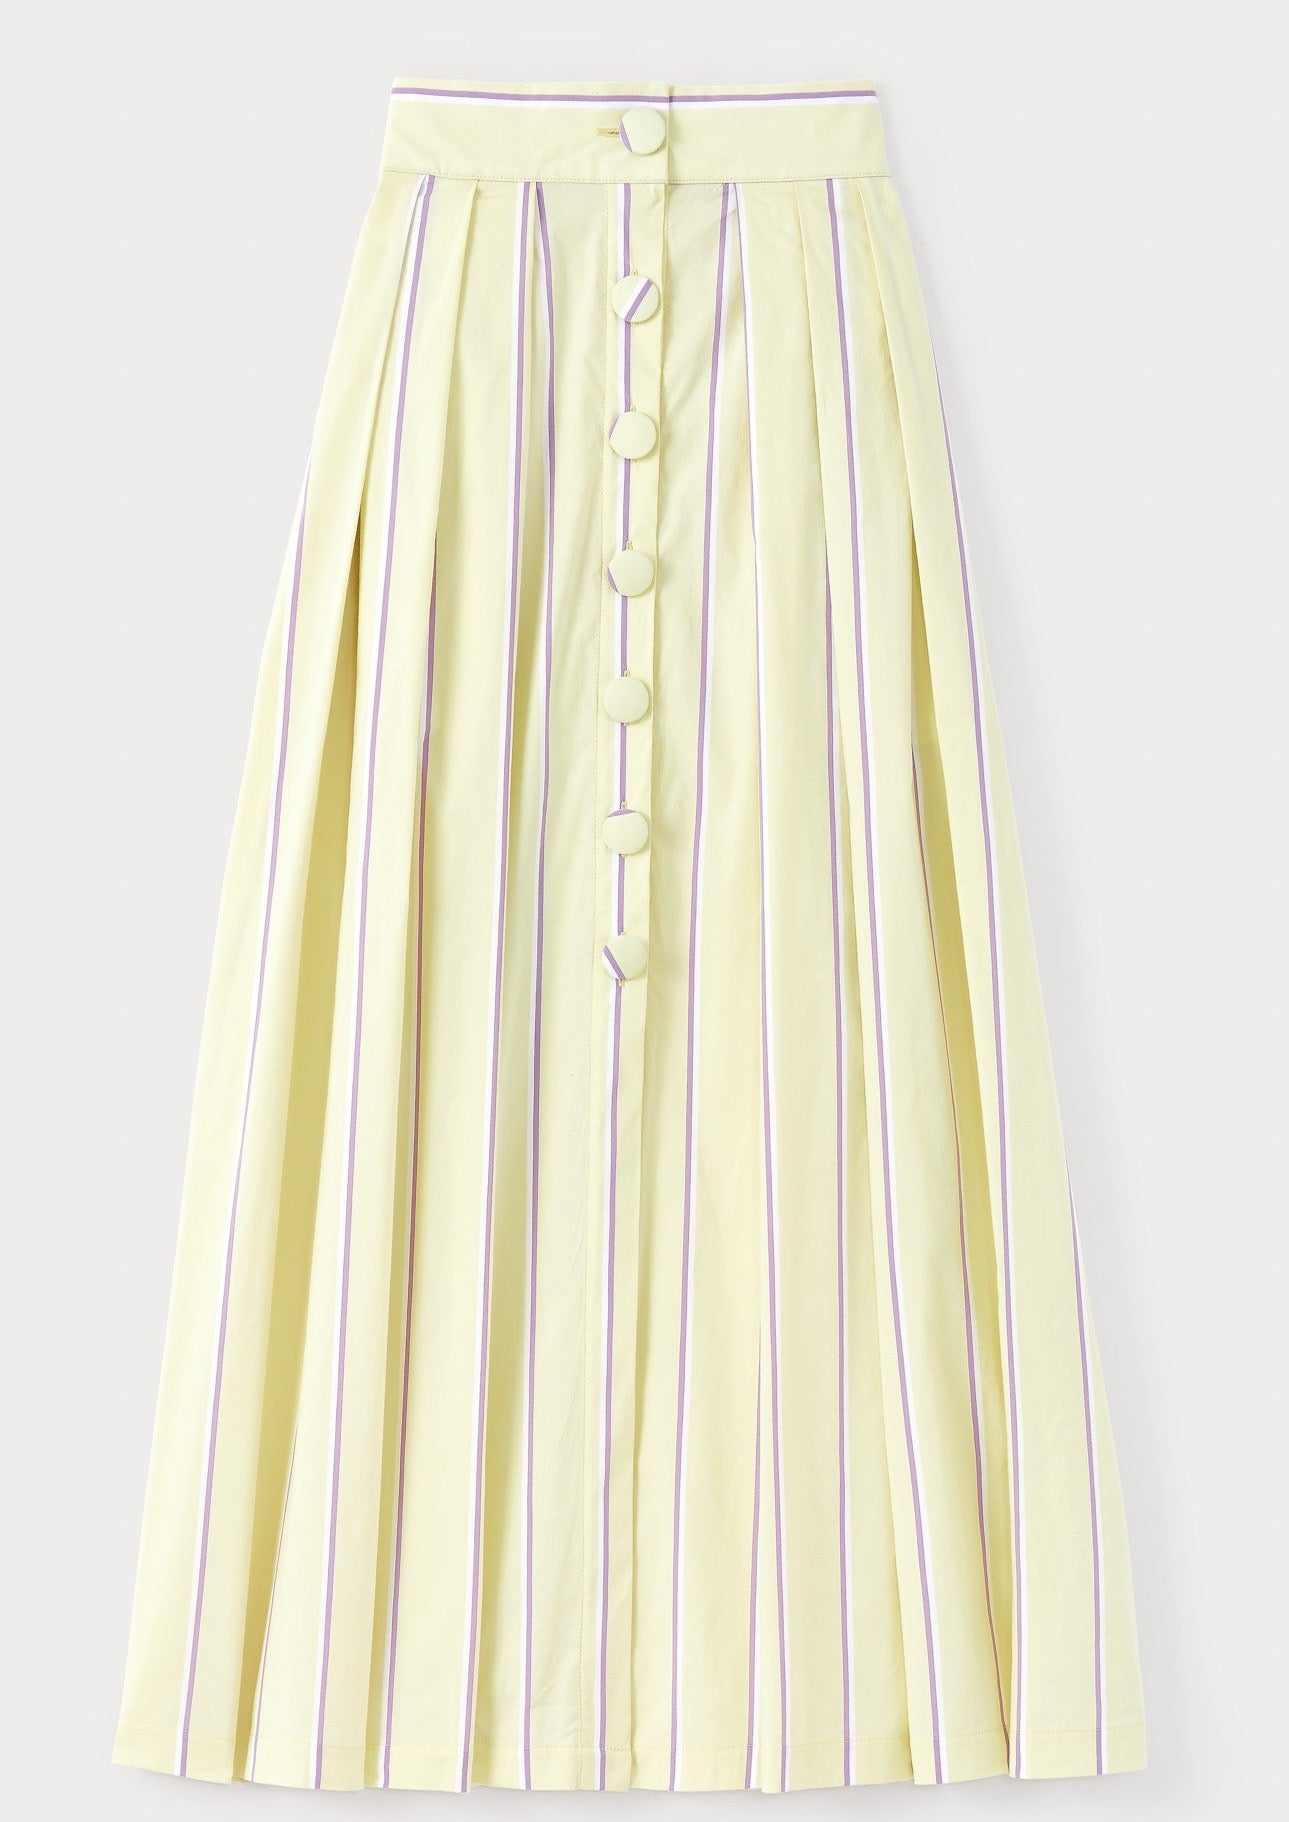 Destree-Irving Soft Stripes Pale Yellow & Lilac Skirt-Justbrazil